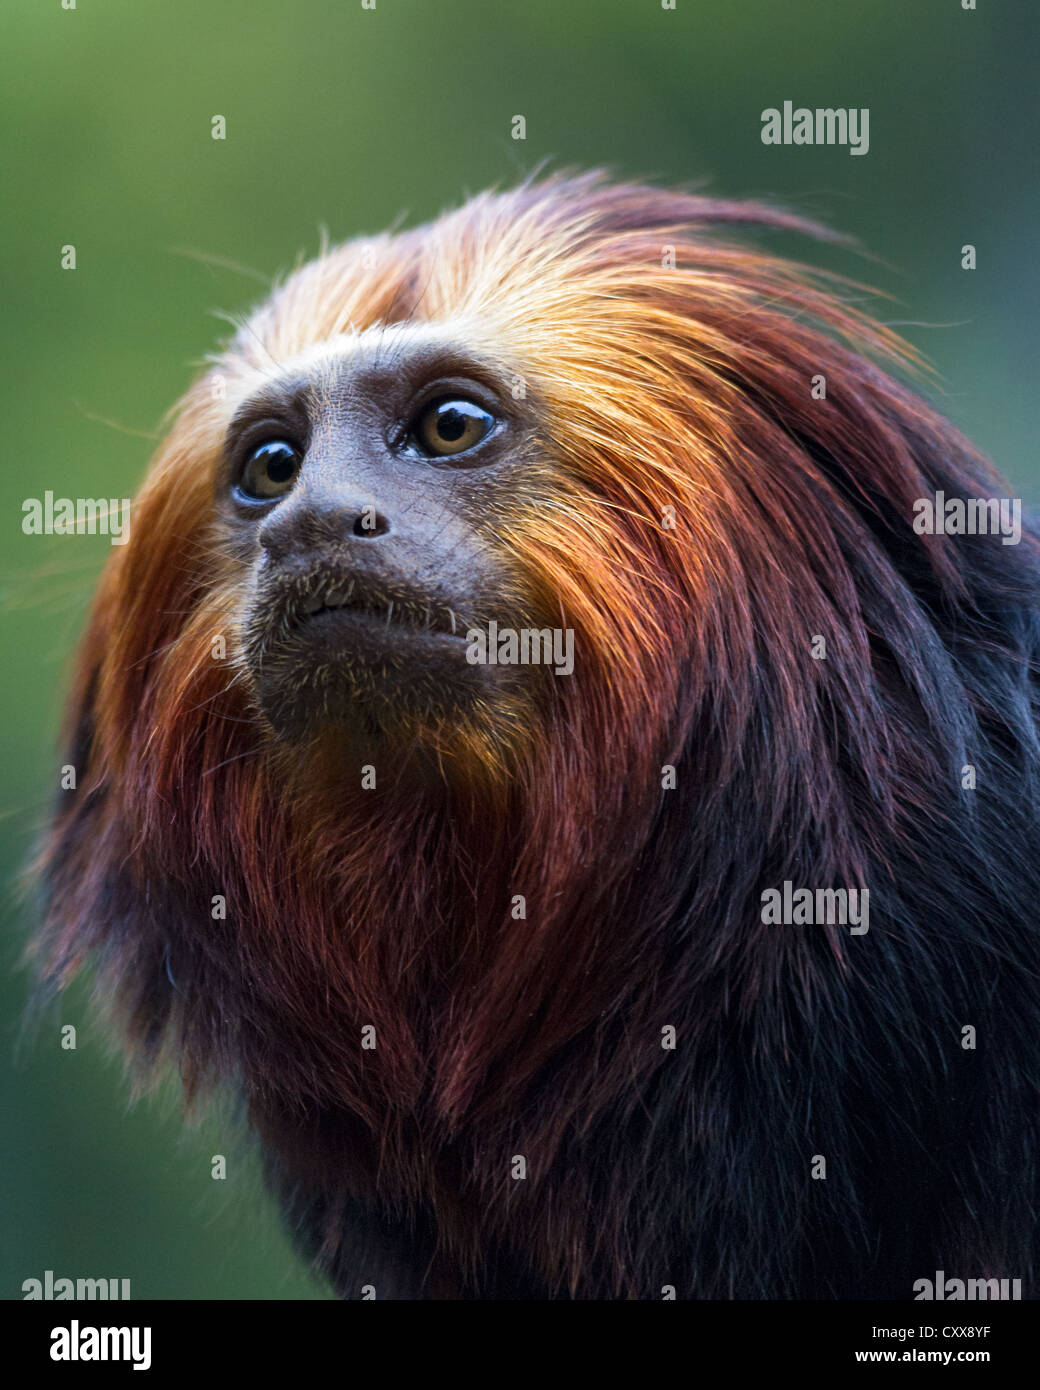 Close-up of a golden lion-headed tamarin (Leontopithecus chrysomelas), blurred green foliage background Stock Photo